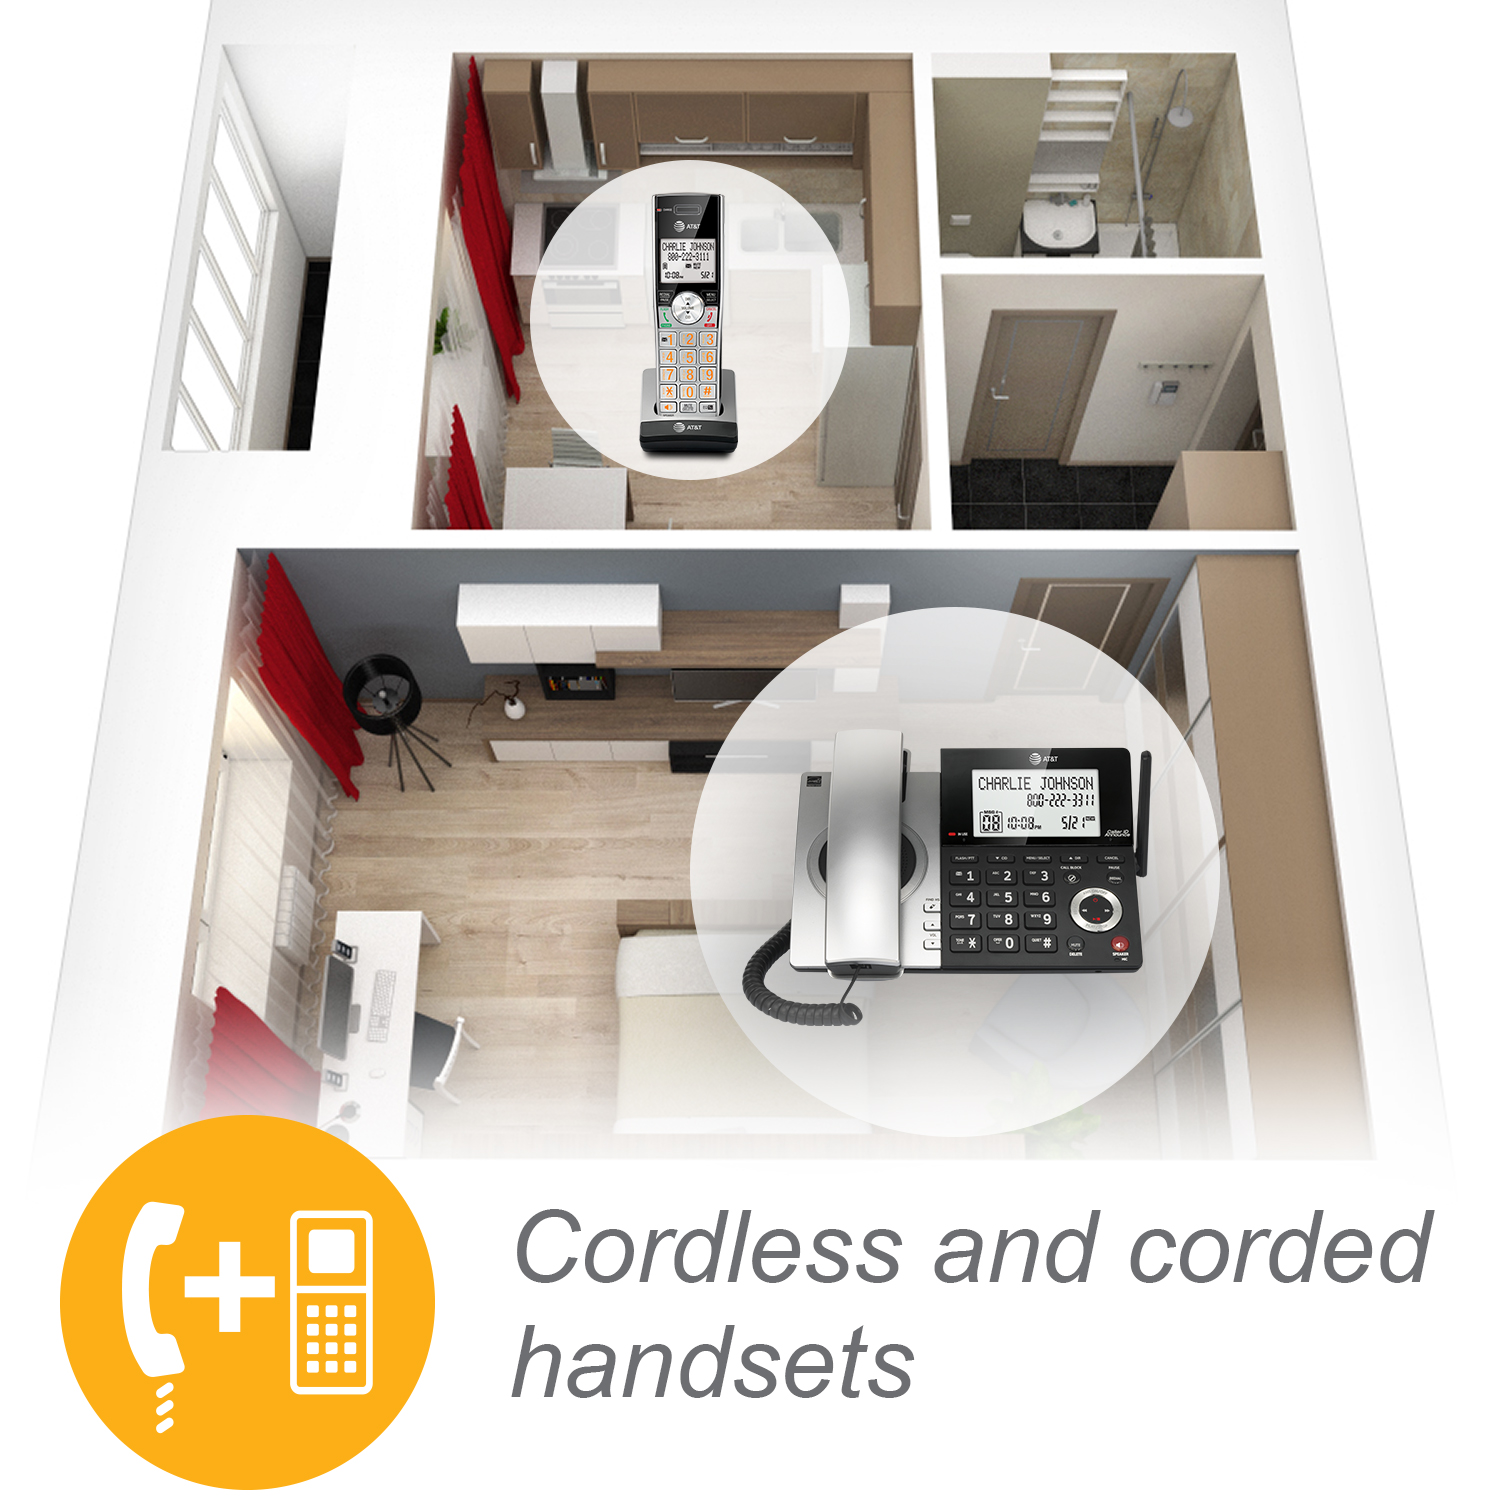 Corded/cordless answering system with smart call blocker - view 10